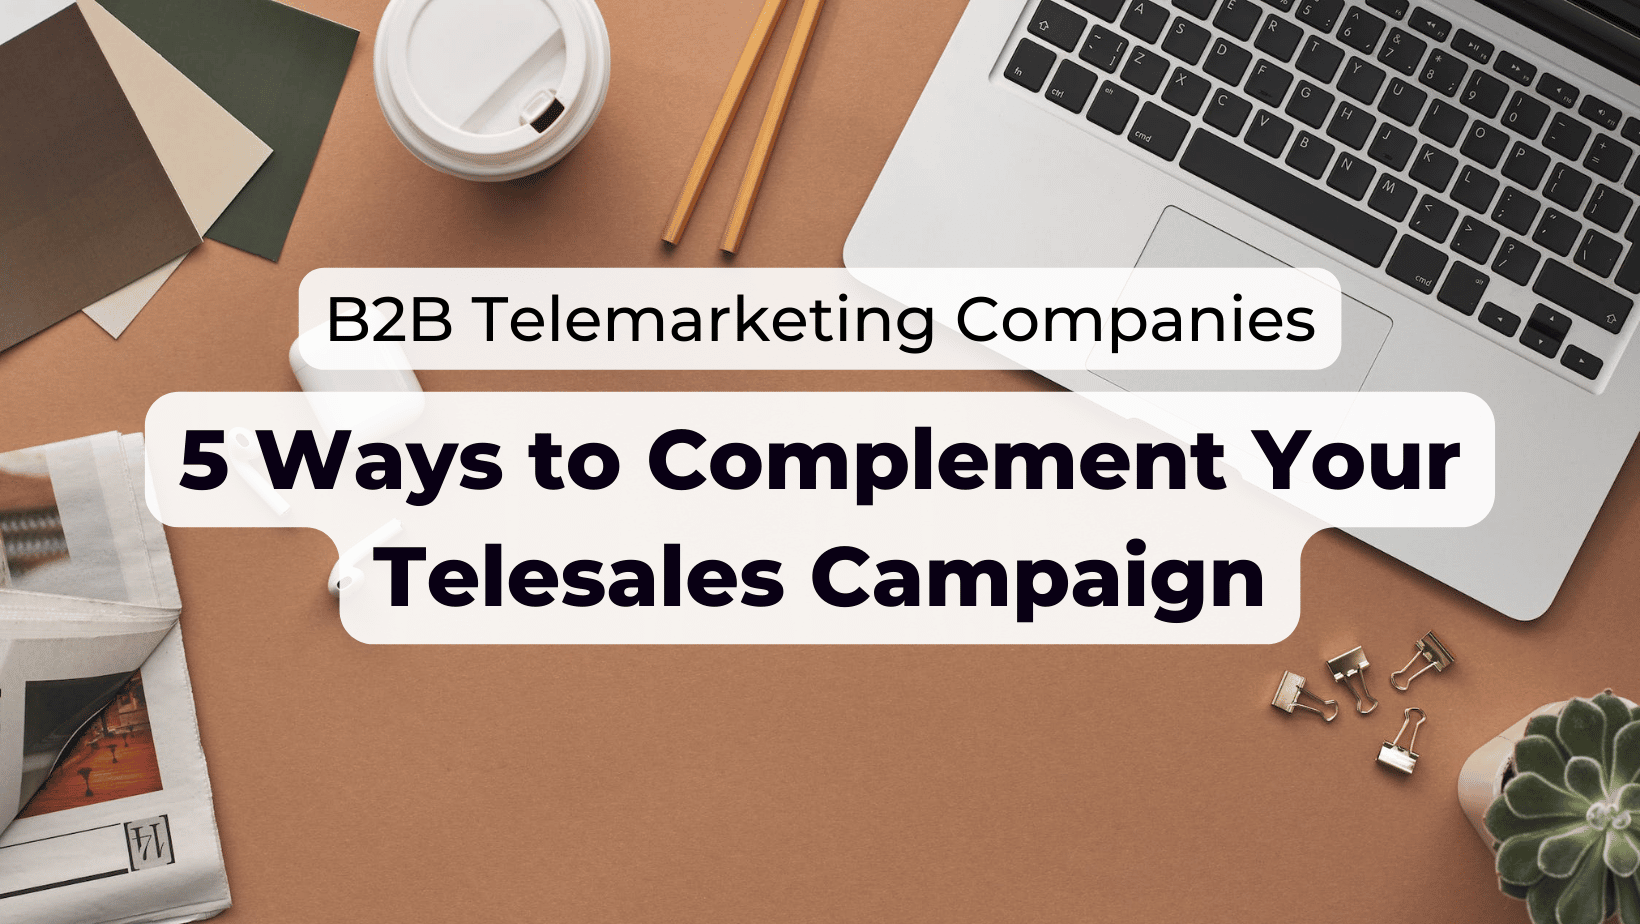 B2B Telemarketing Companies: 5 Ways to Complement Your Telesales Campaign